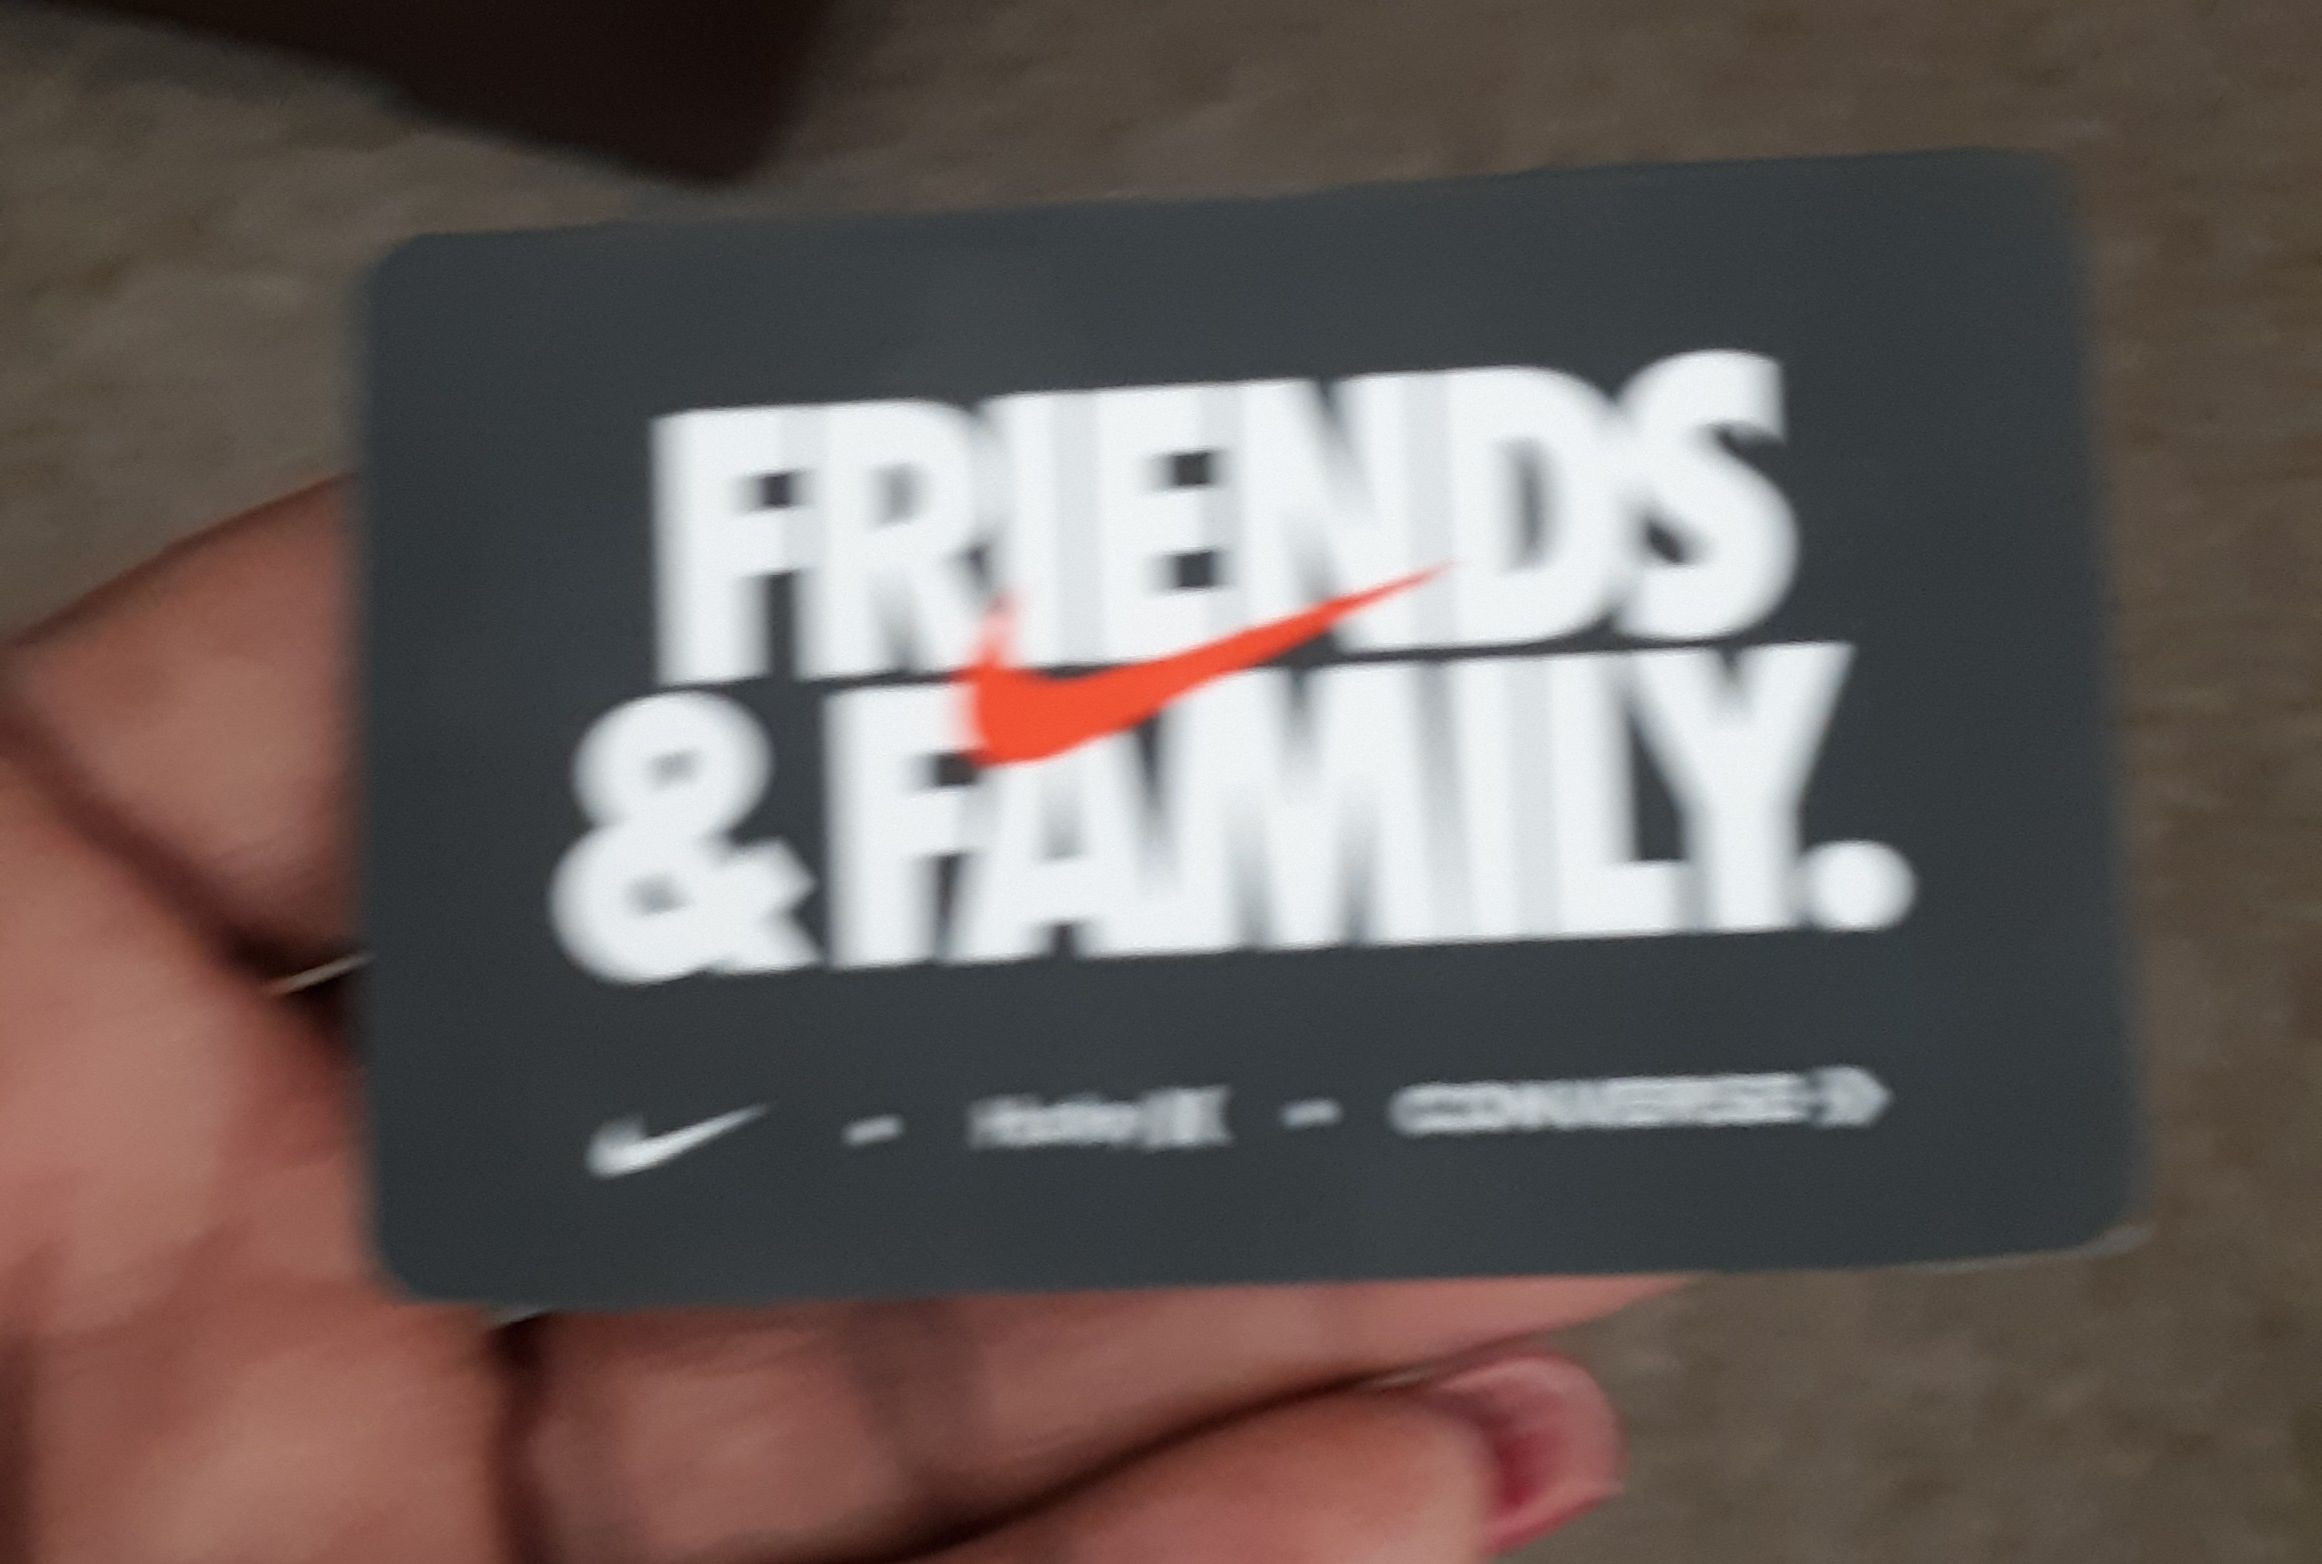 Nike Discount Card after shopping with me